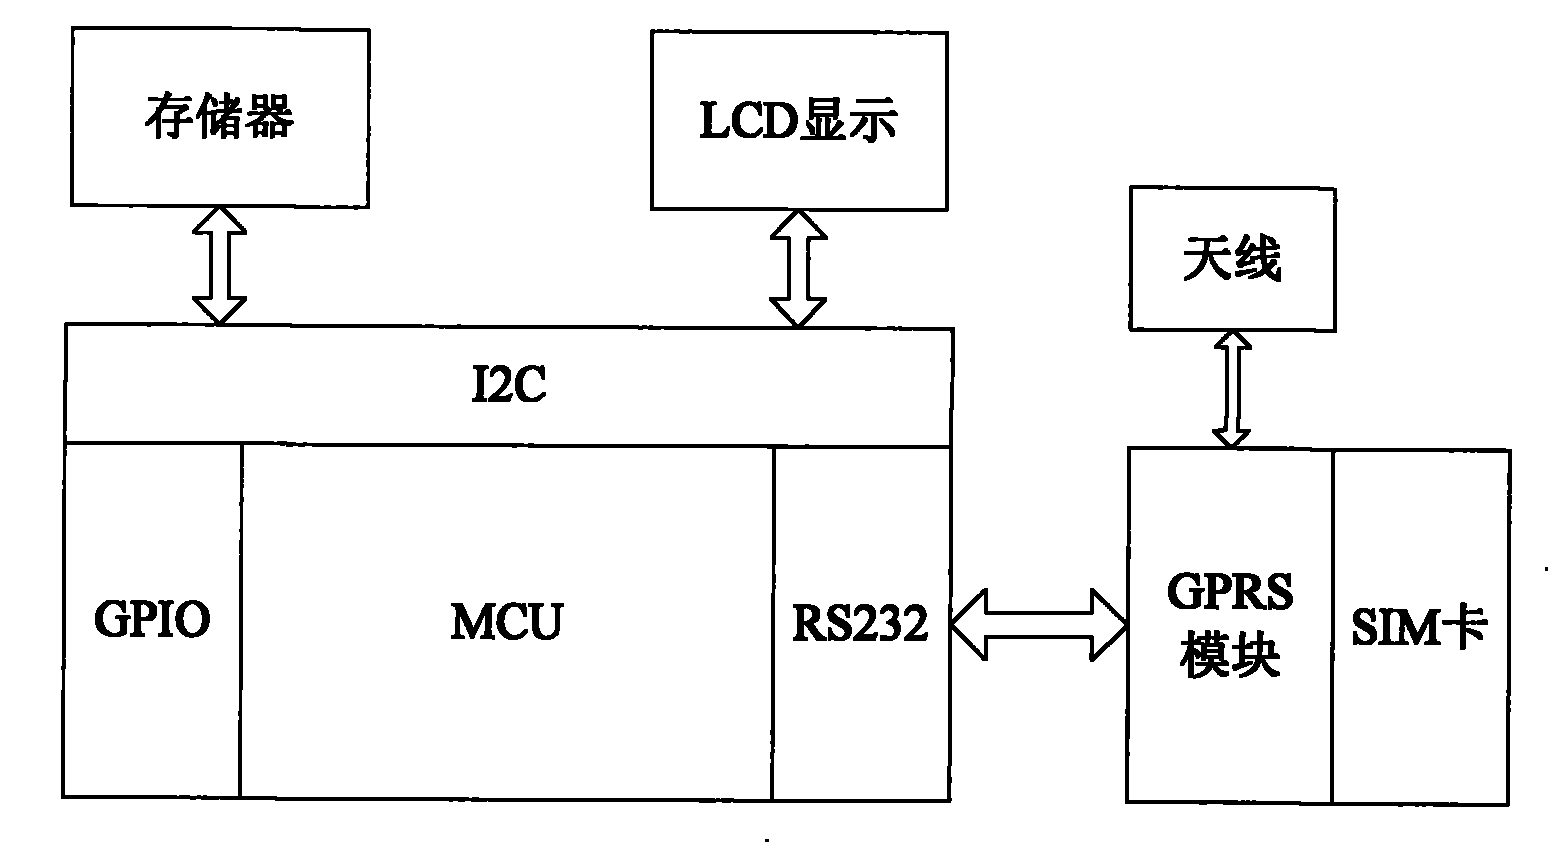 Remote upgrading system of television set